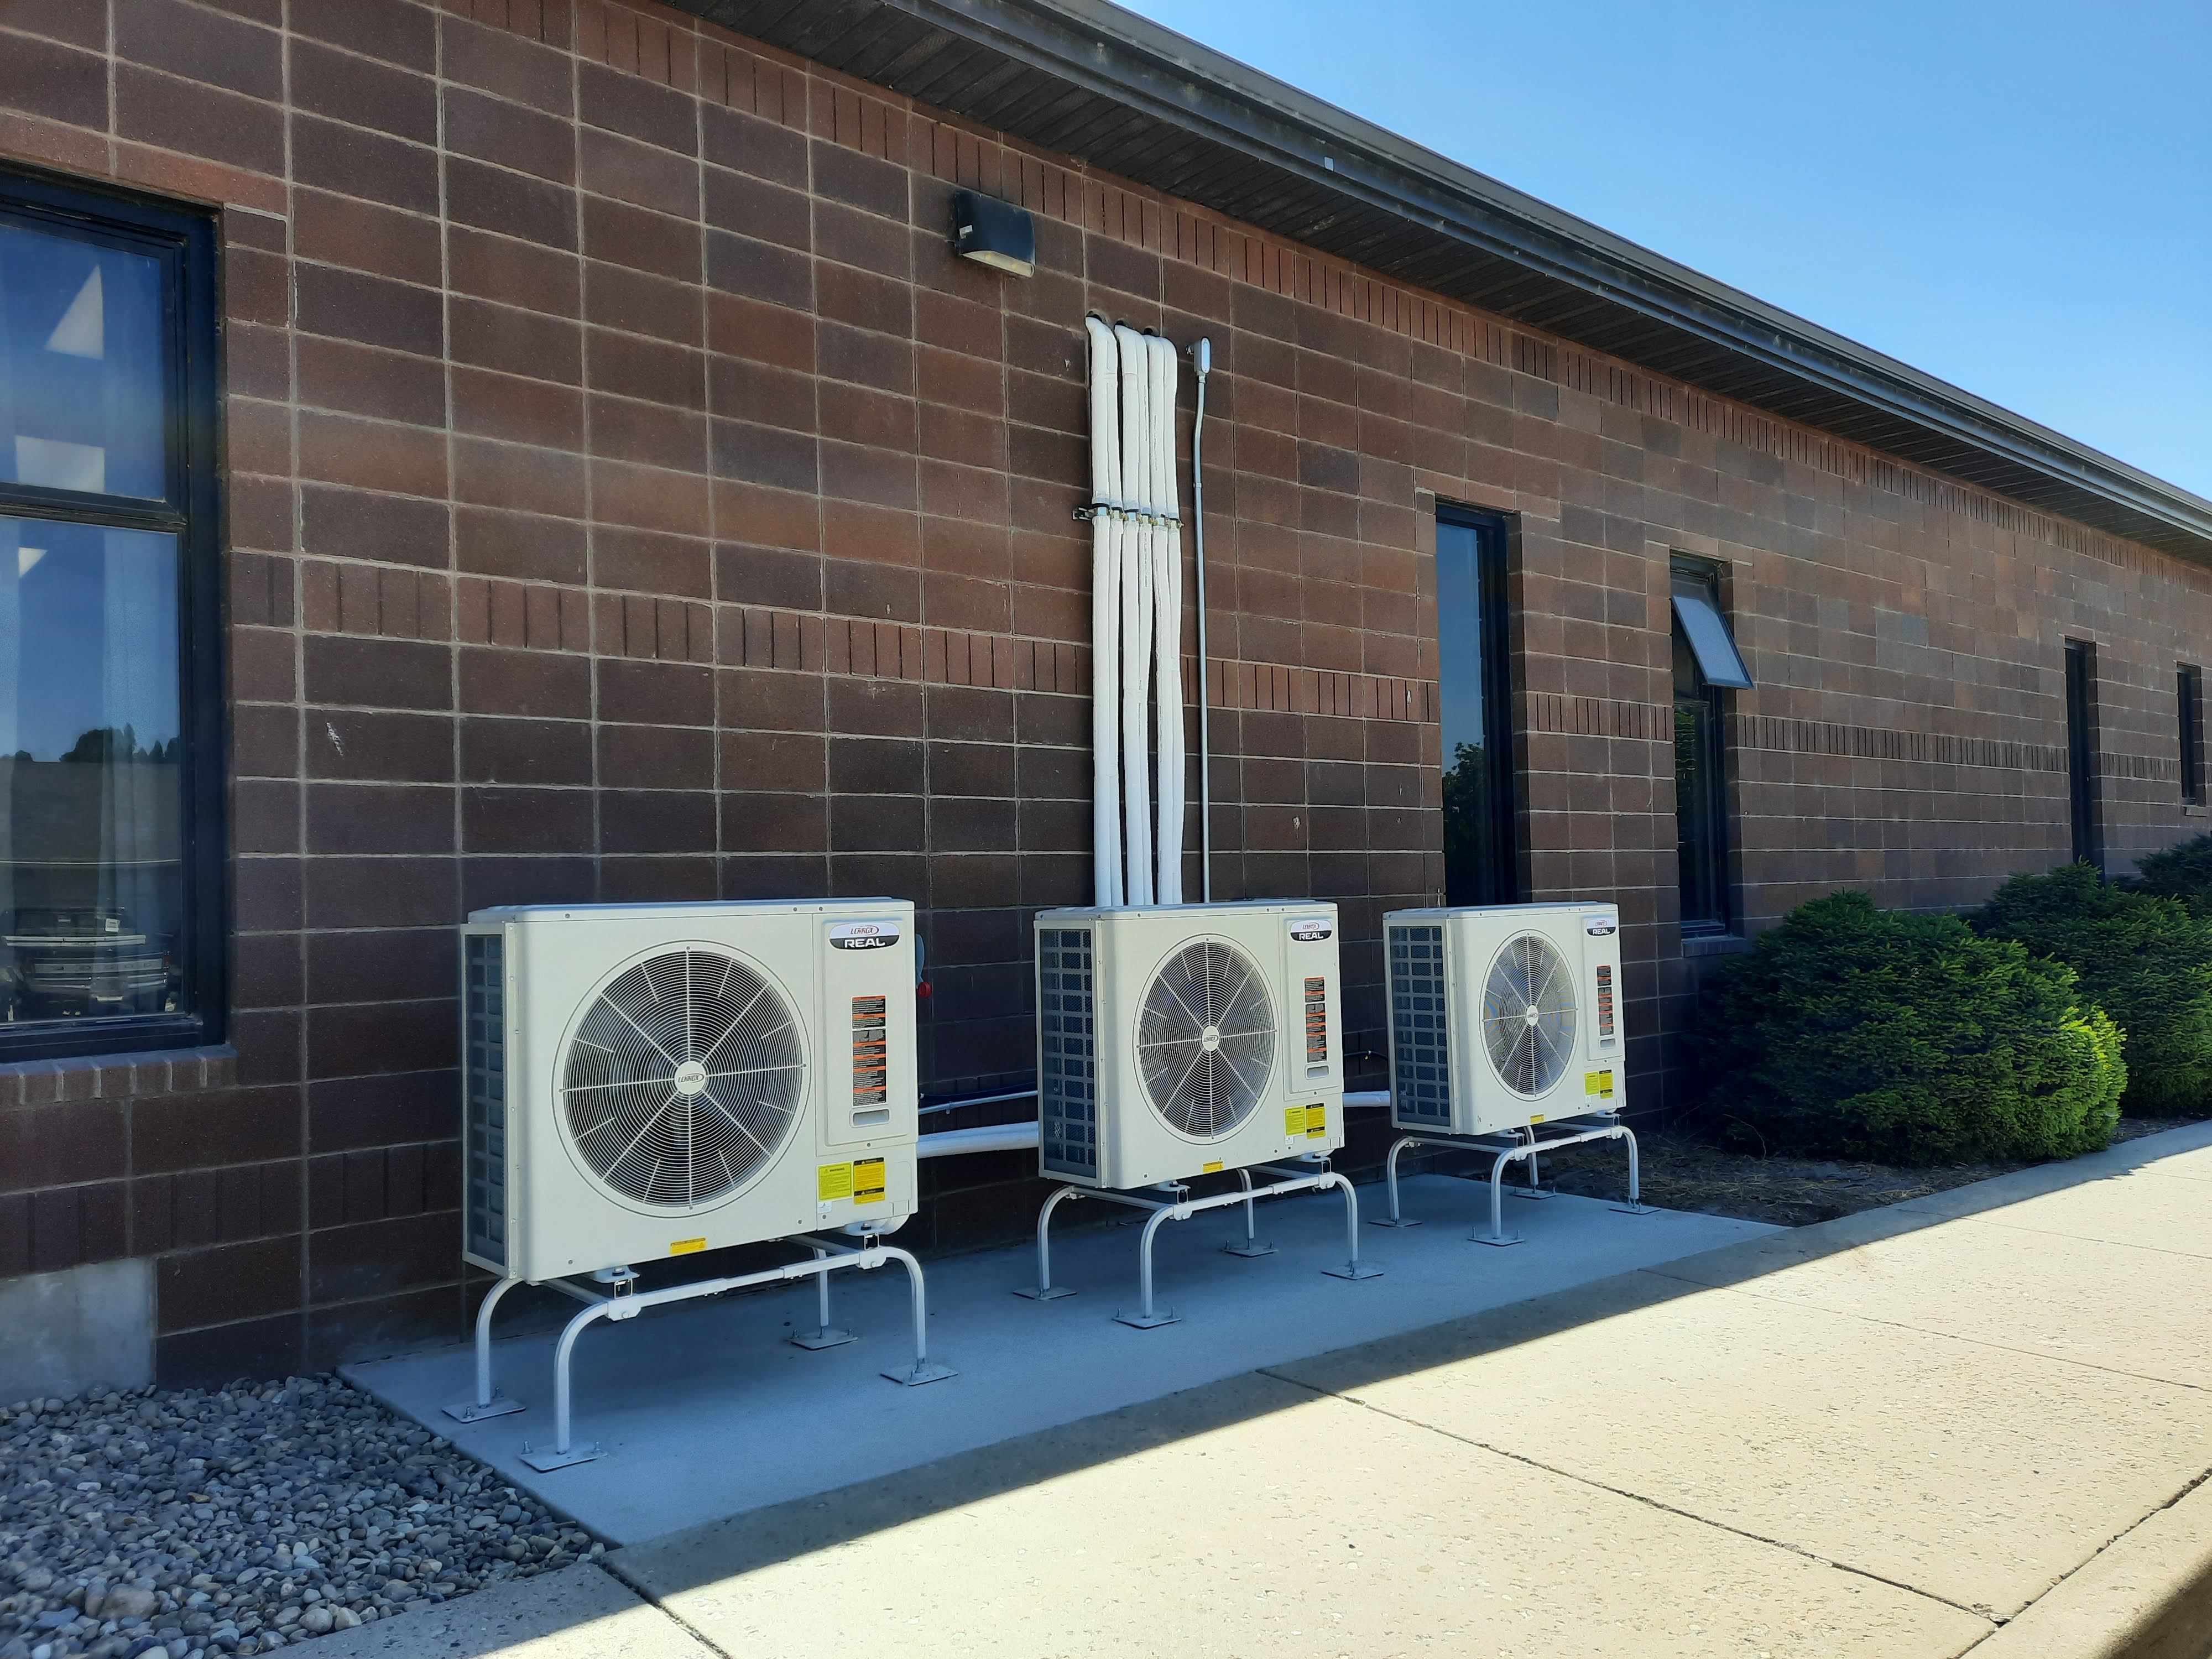 AC units at the high school